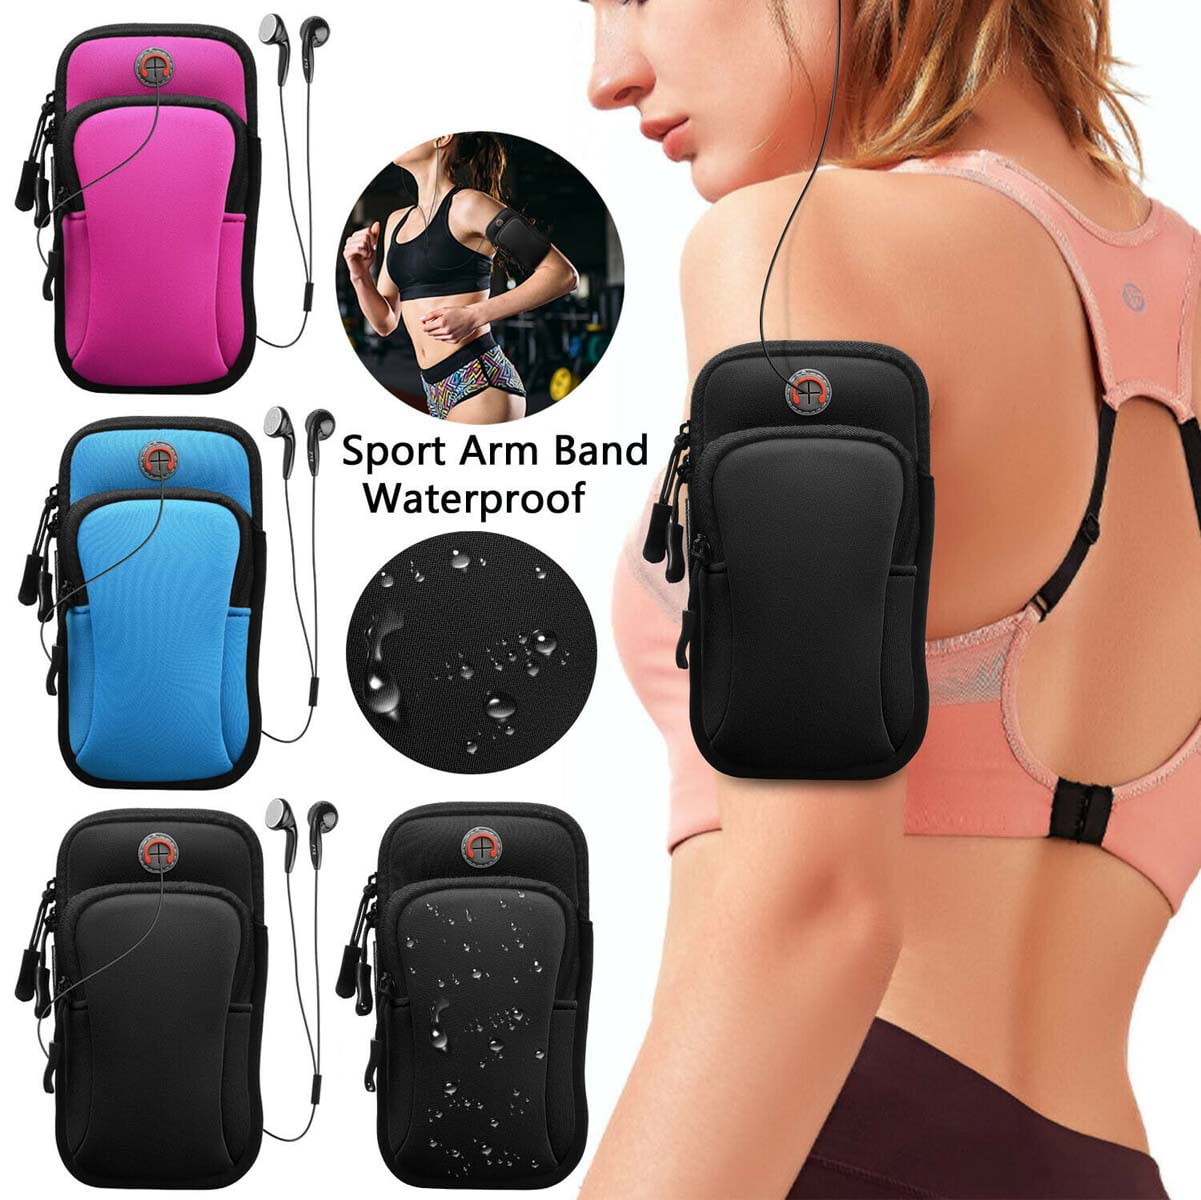 Waterproof Arm Band Mobile Phone Holder Bag Case Armband Sports Exercise Pouch 